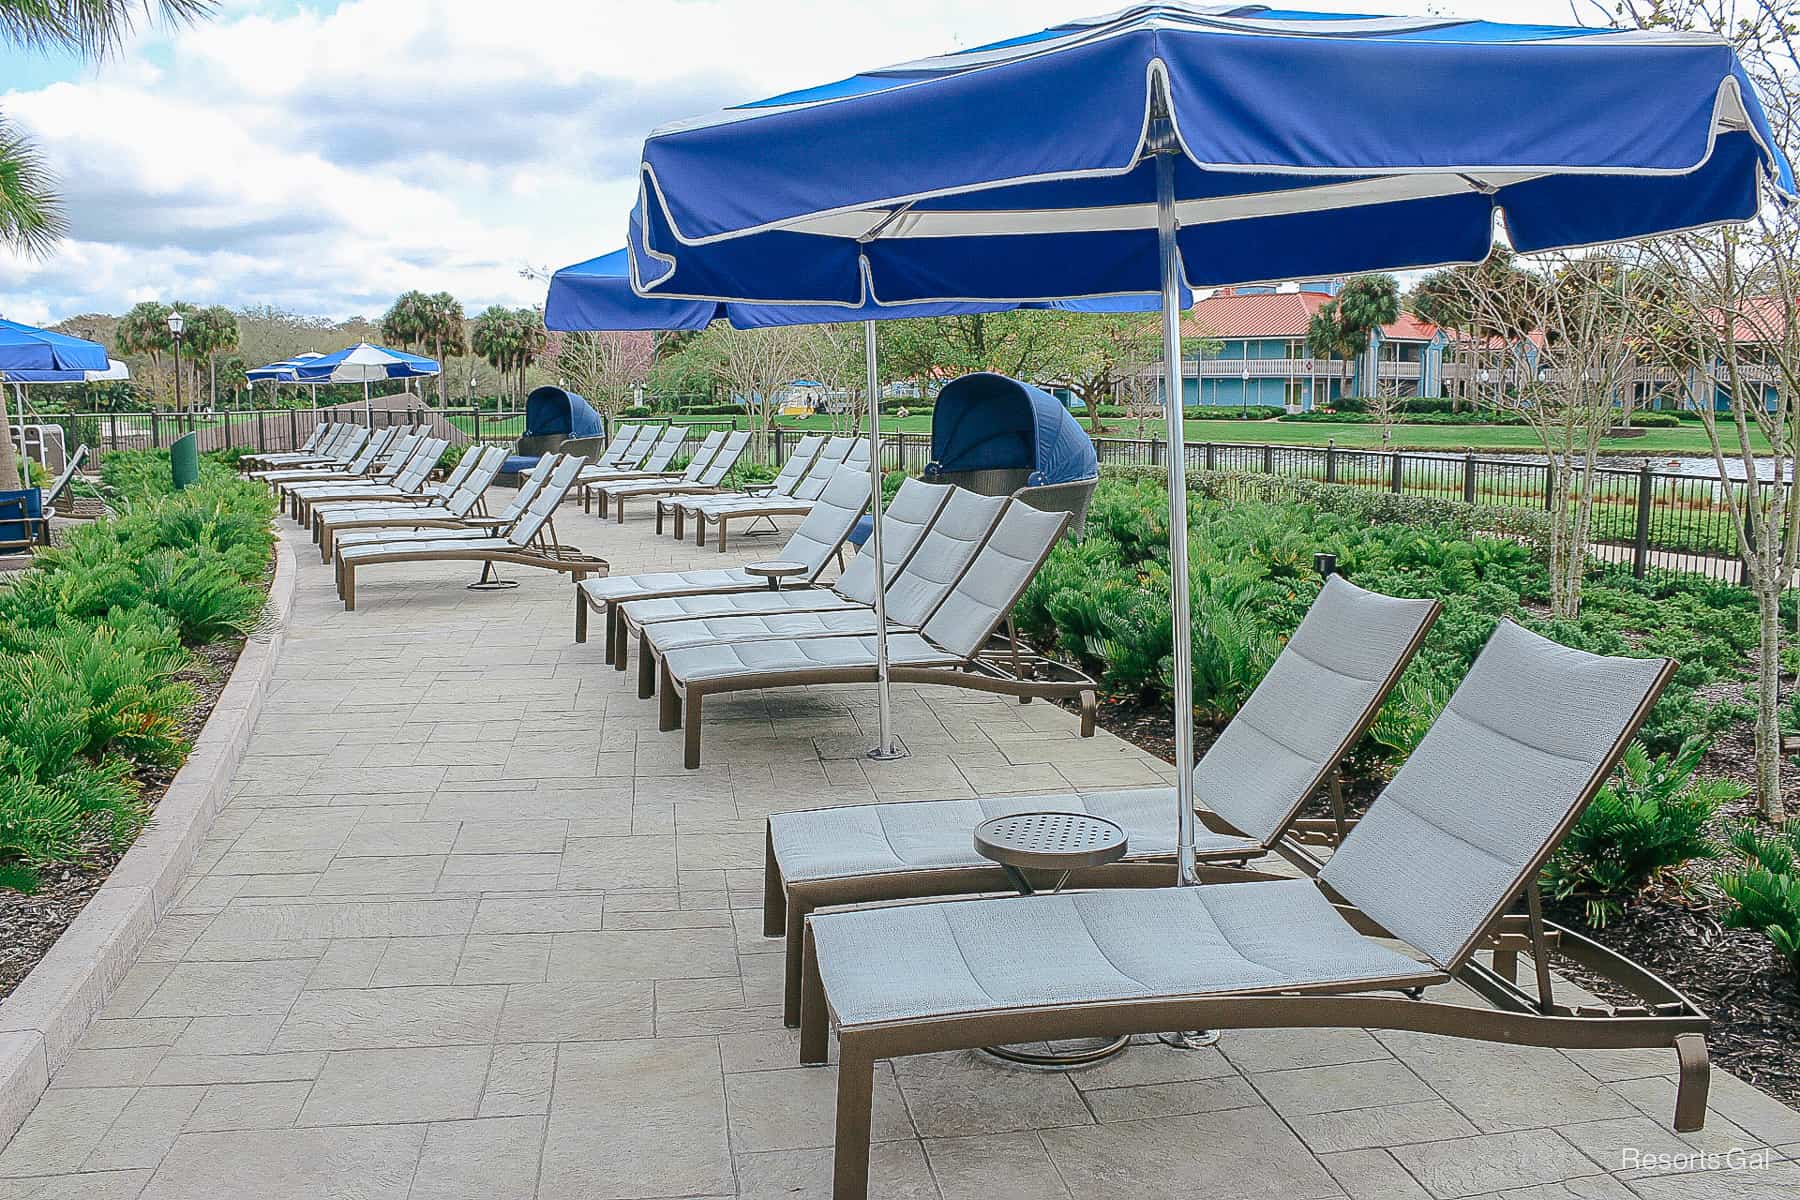 One of the seating areas at the Riviera Pool 